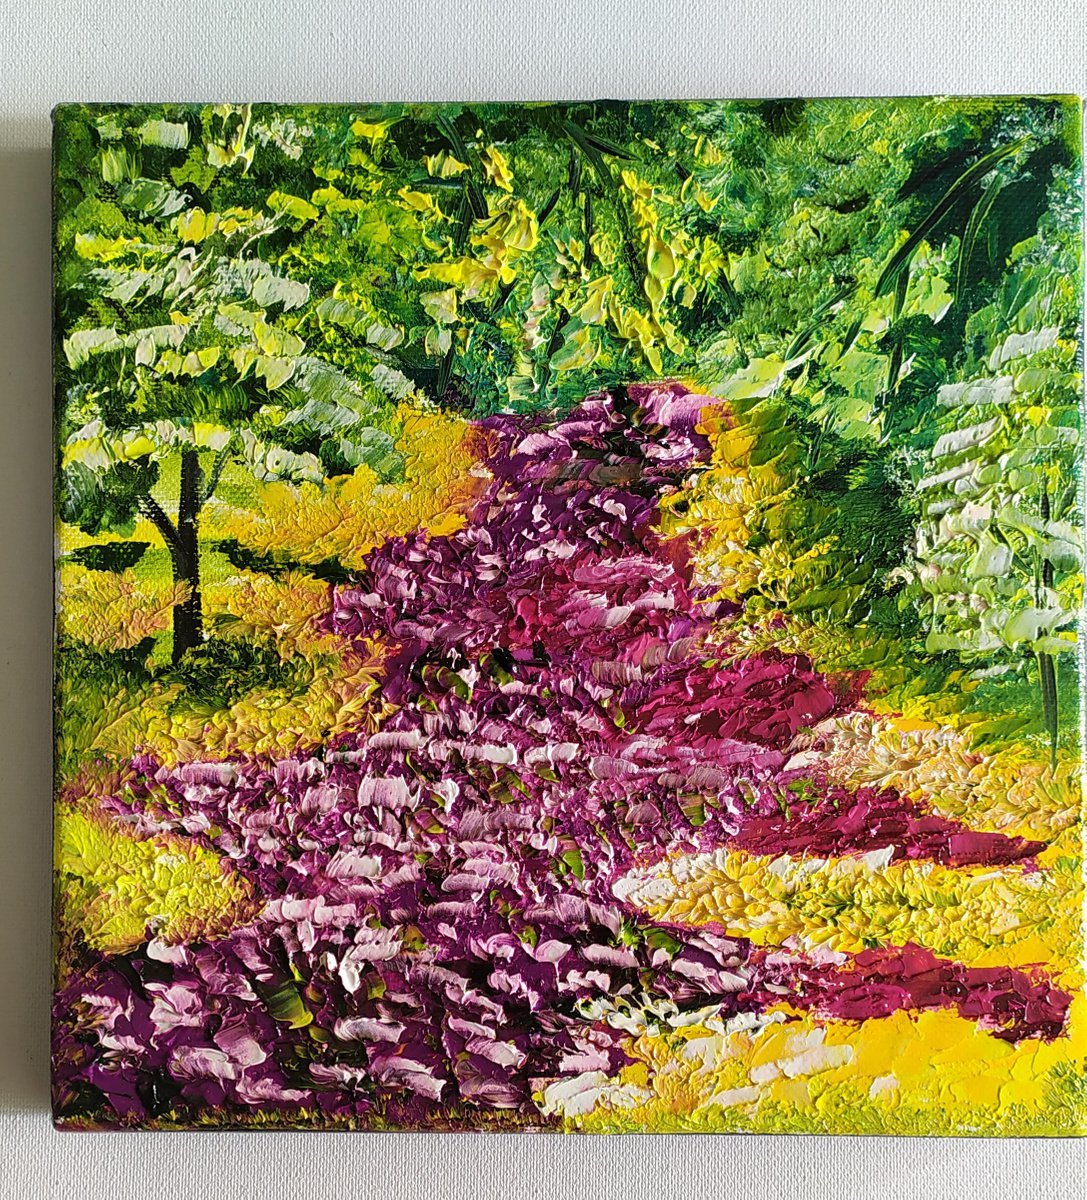 Flower way, original small landscape oil painting, Gift, art for home by Nataliia Plakhotnyk